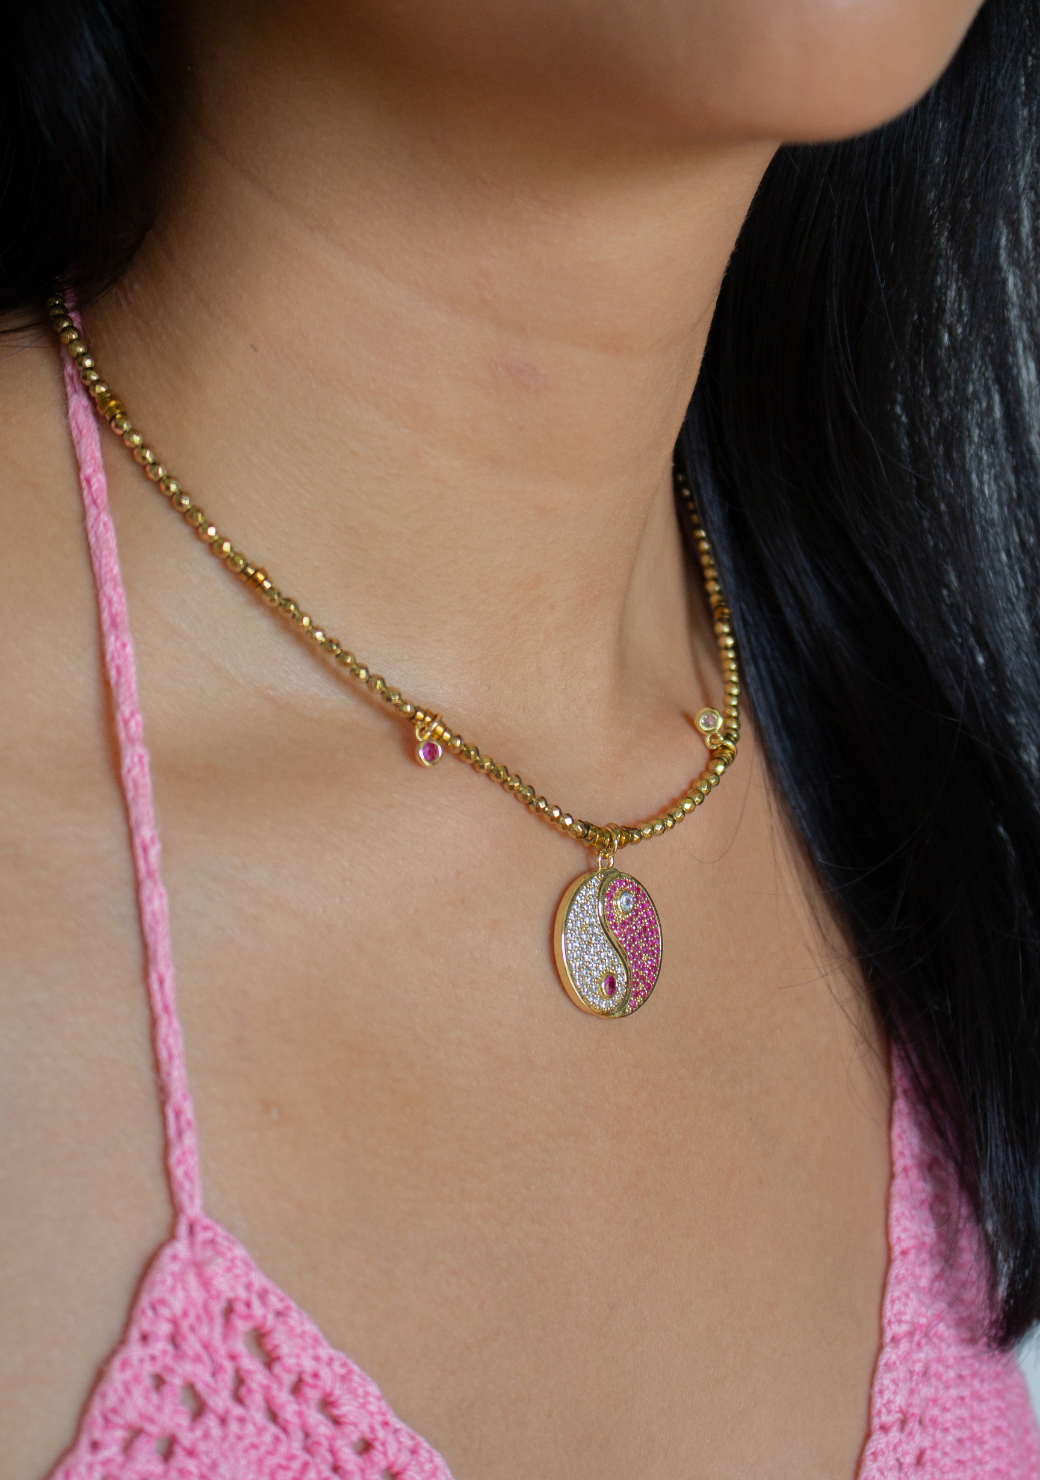 Keira Necklace in Gold with Yin Yang Pendant